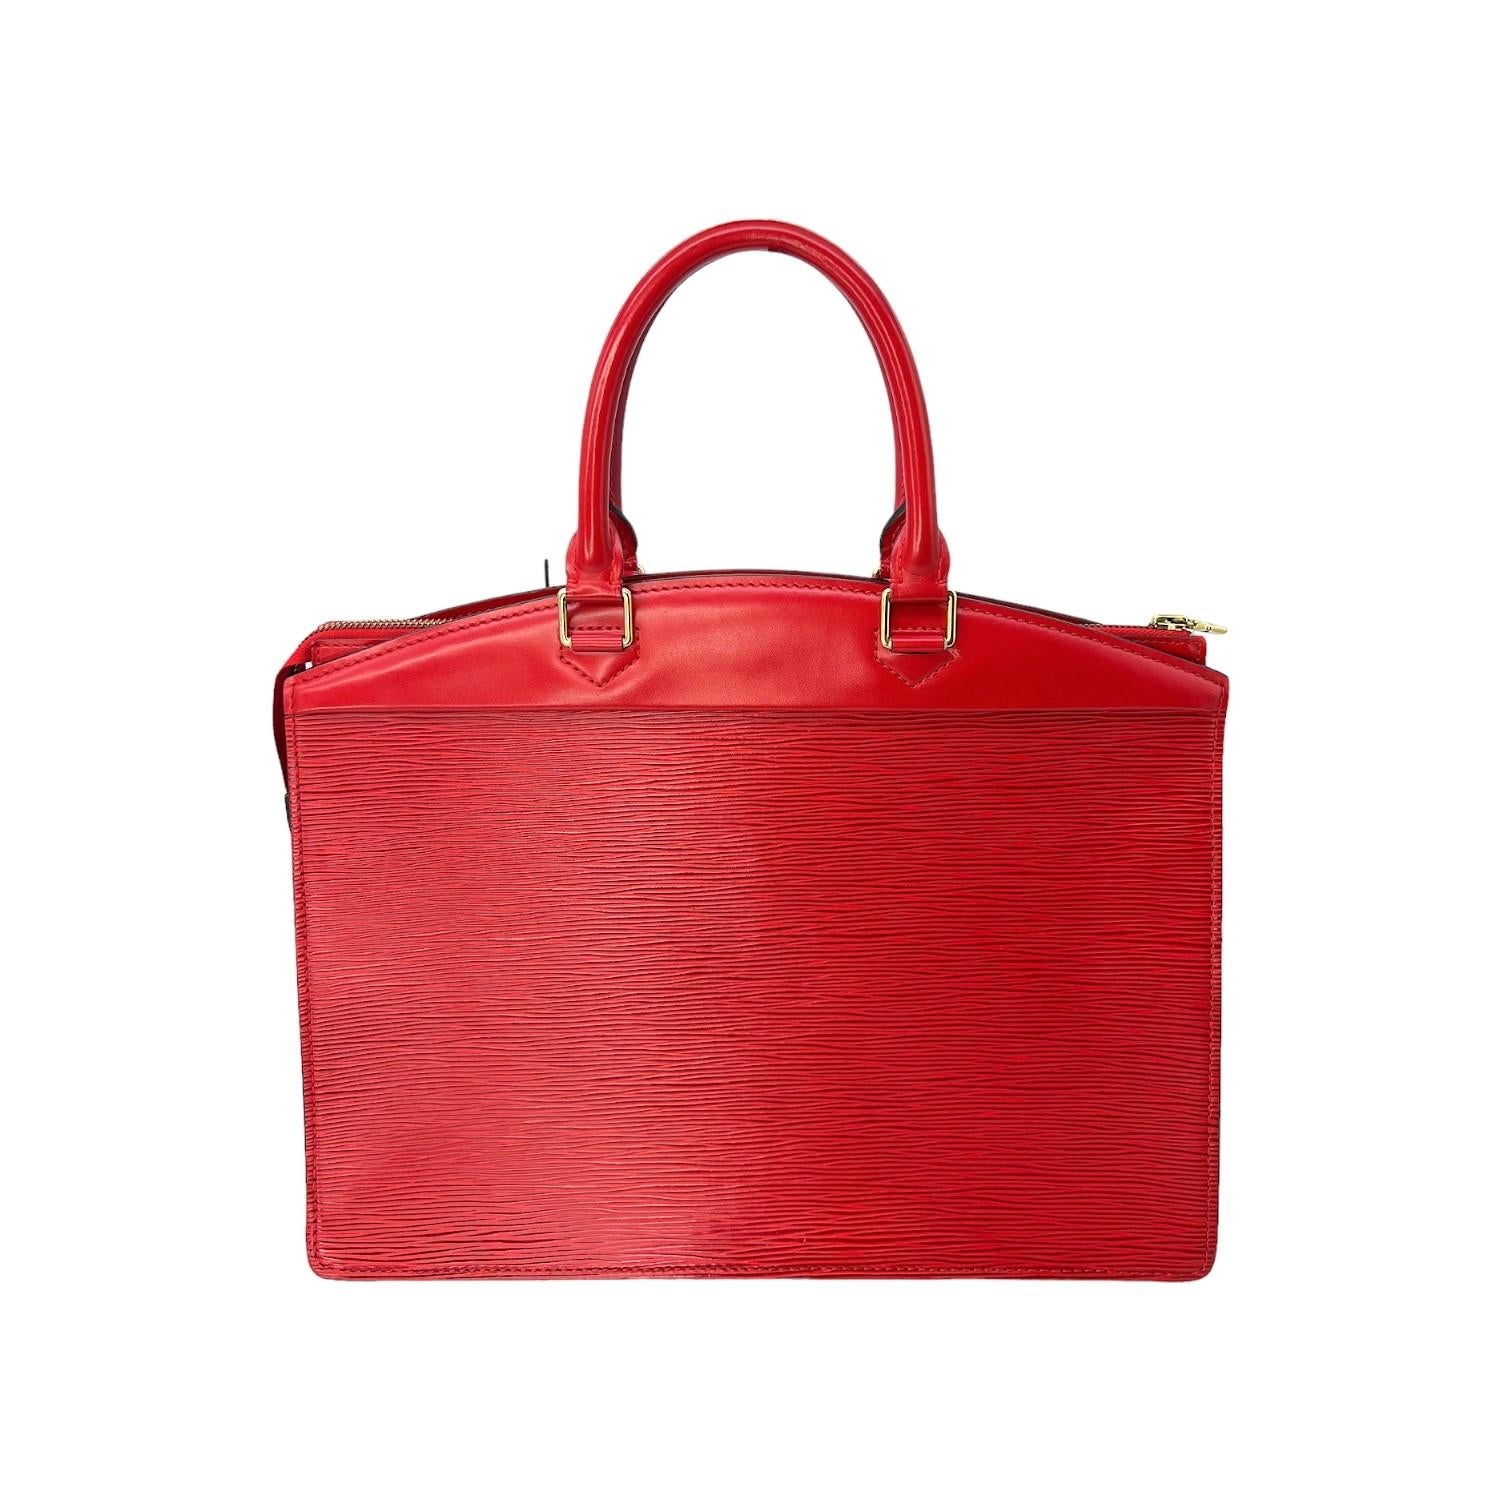 This beautiful Louis Vuitton Epi Riviera Handbag was made in France and it is finely crafted of a red epi leather exterior with leather trimming and gold-tone hardware features. It has a frontal zipper pocket. It has dual rolled leather top handles.